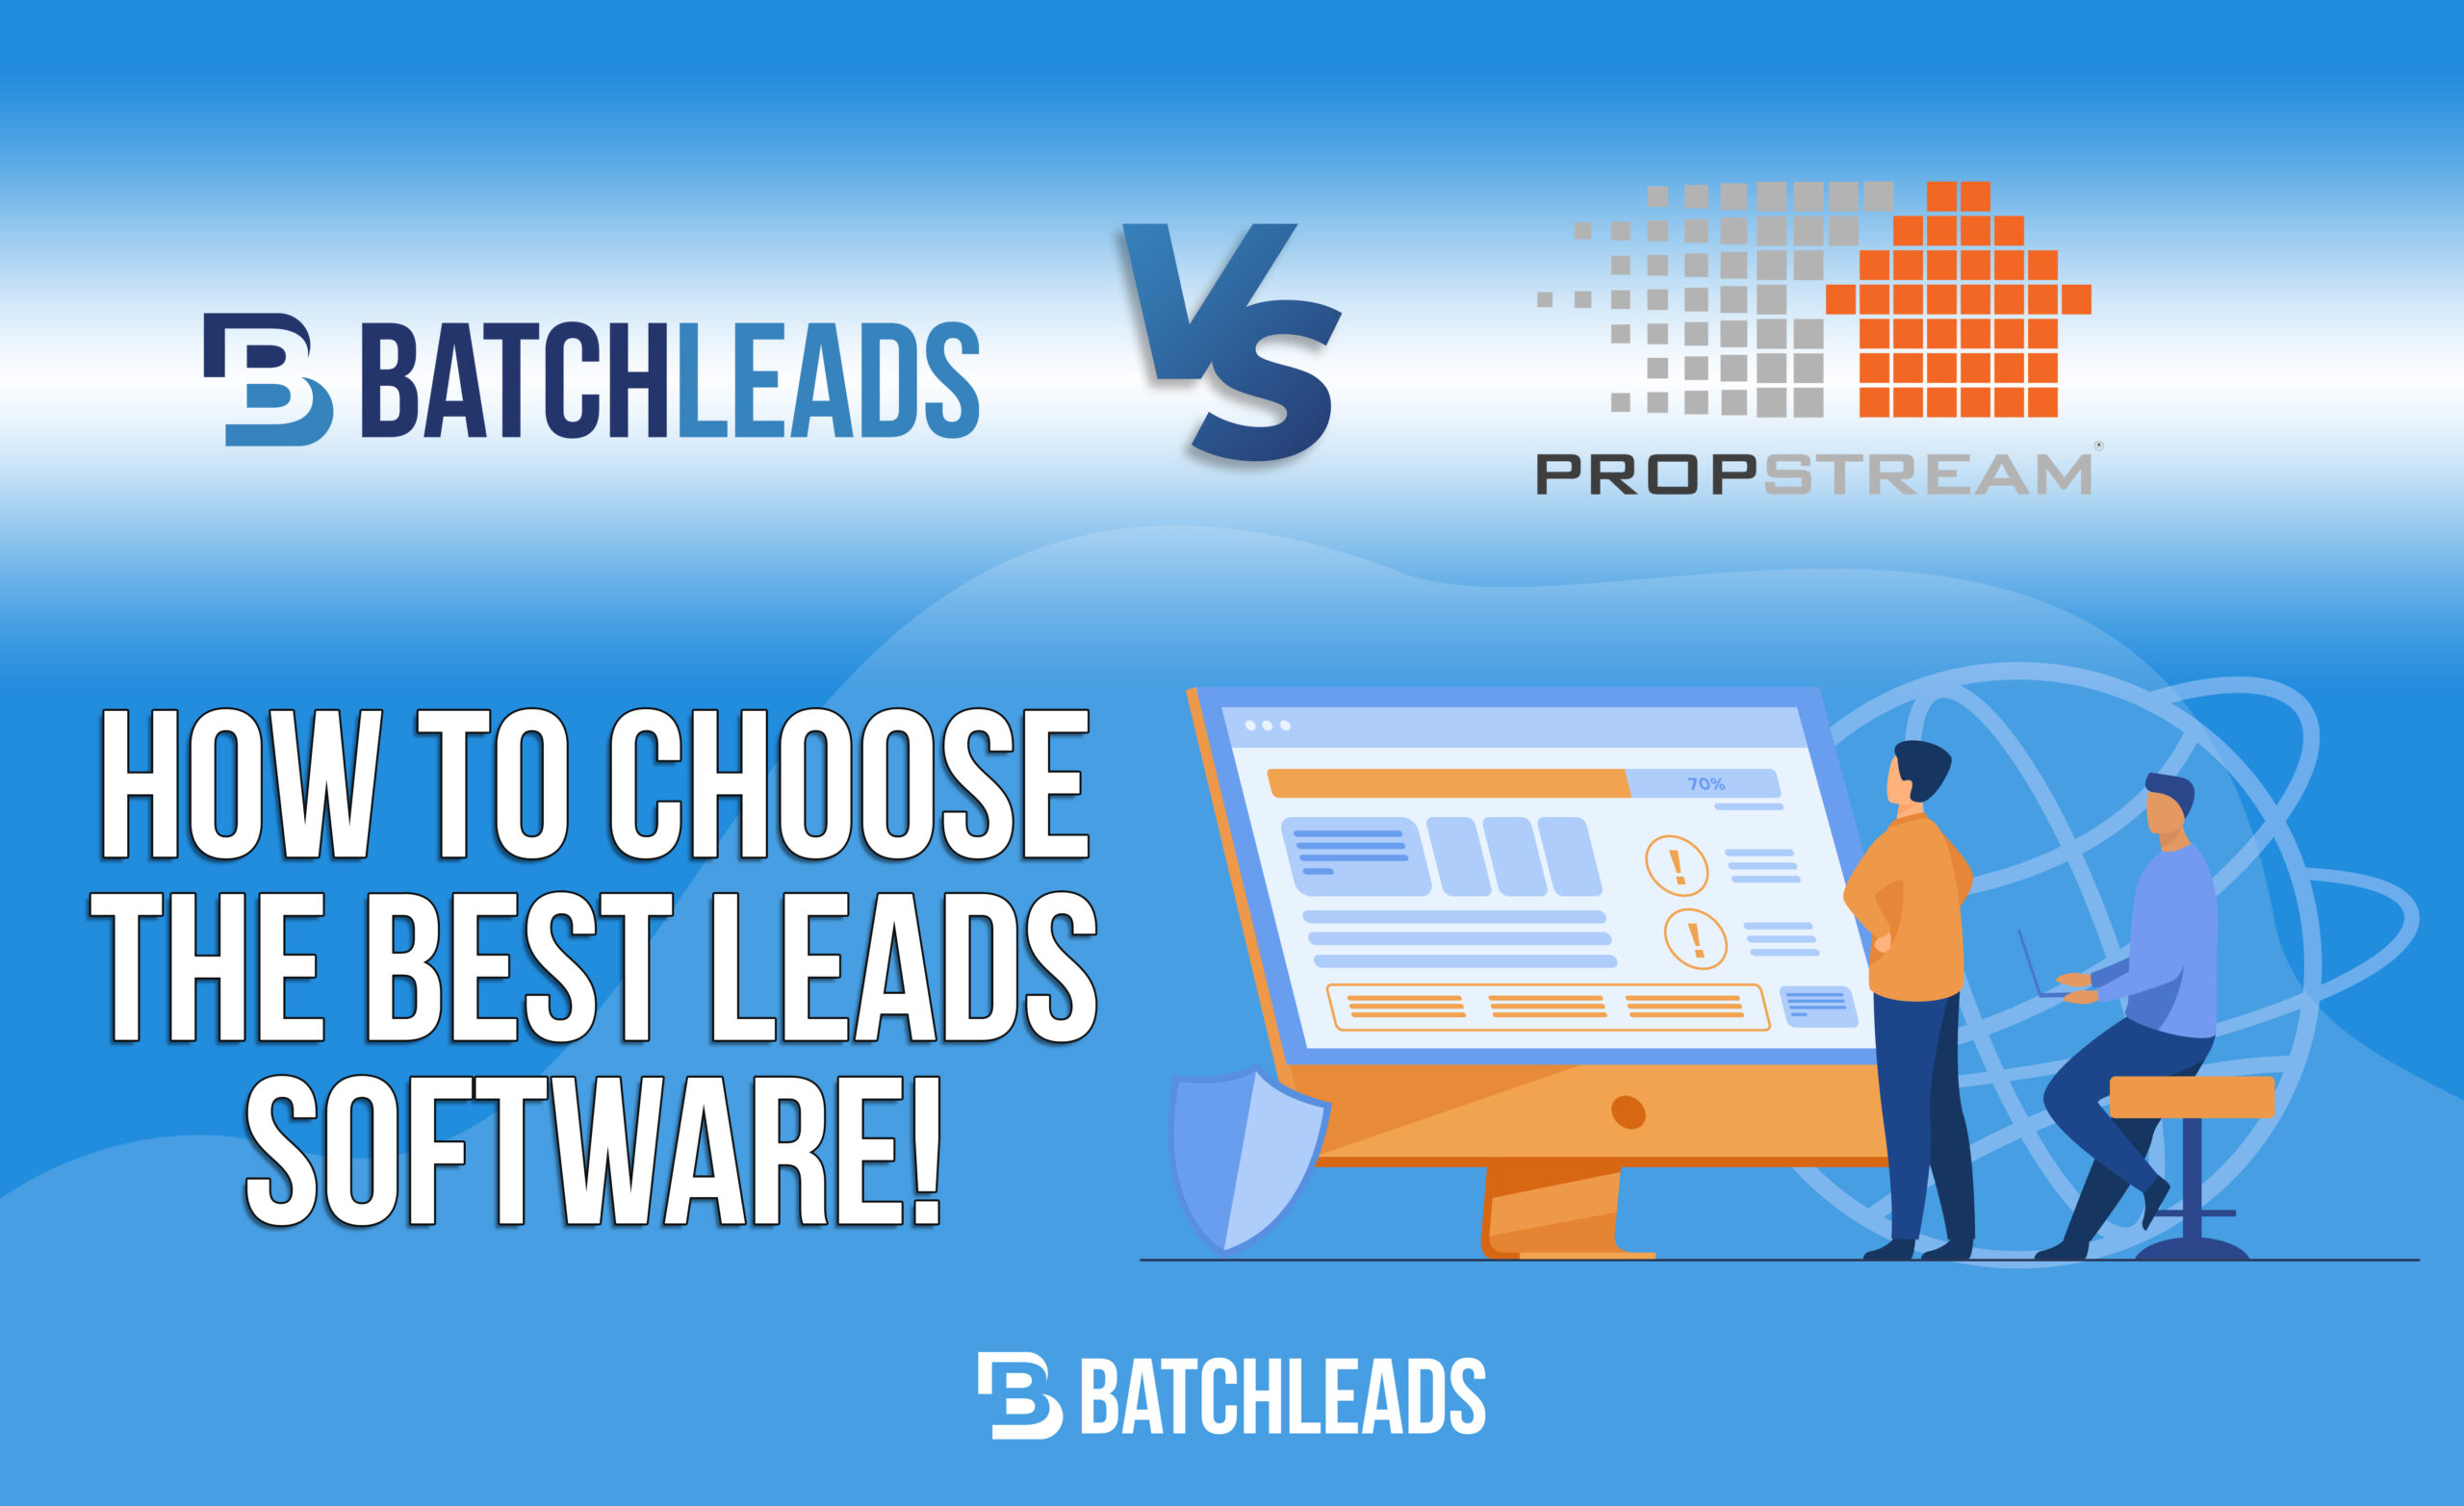 batchleads vs propsteam